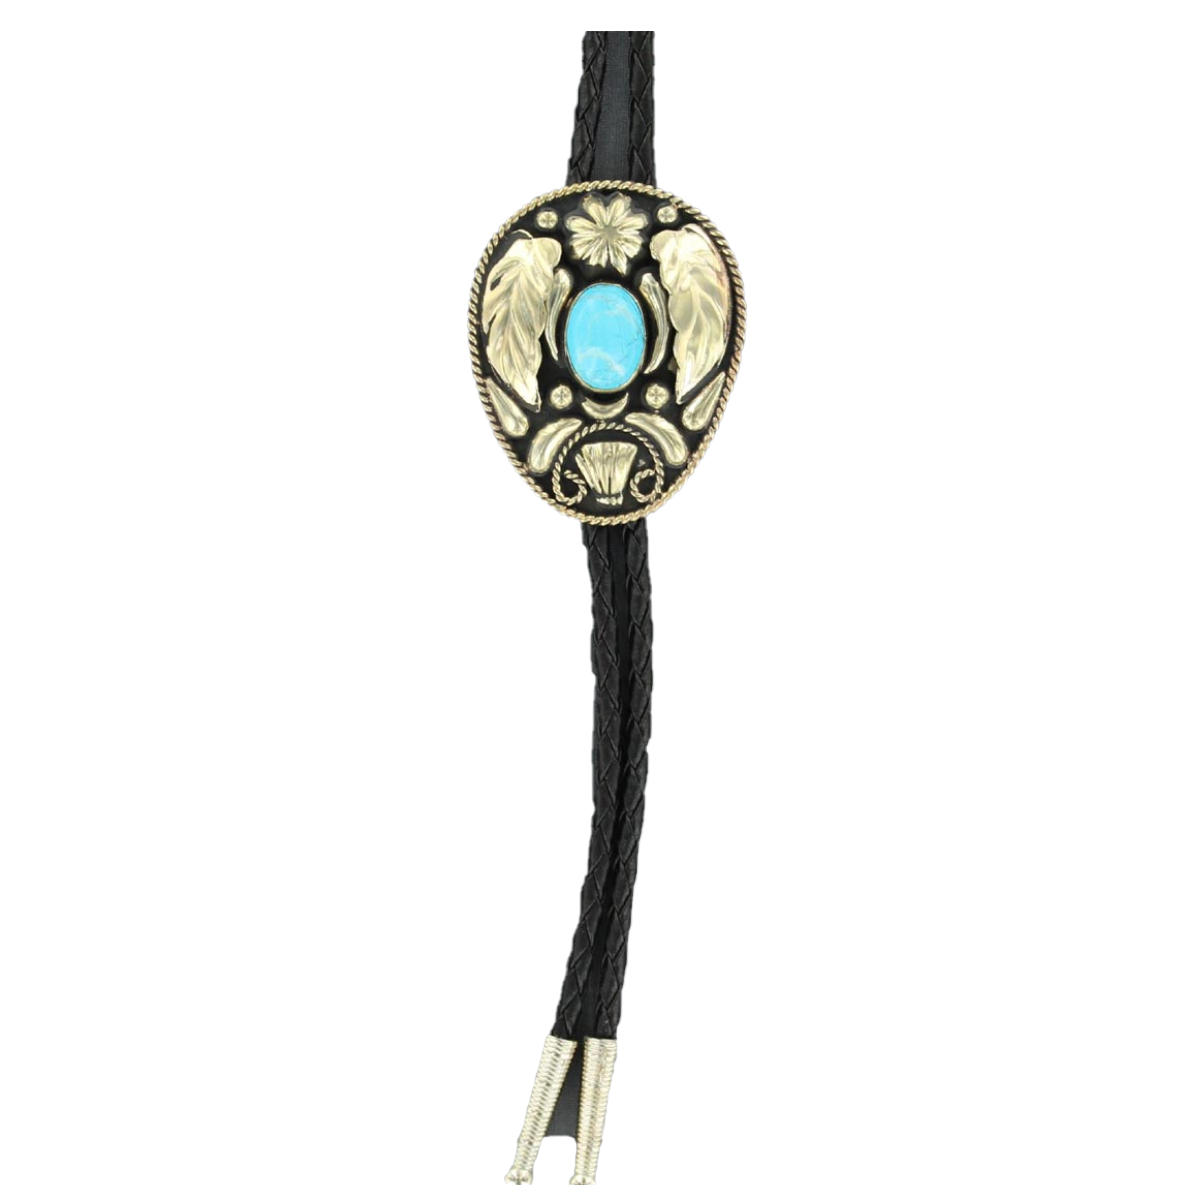 M&F Western Double Strap Adult Turquoise Stone Bolo Tie 22110